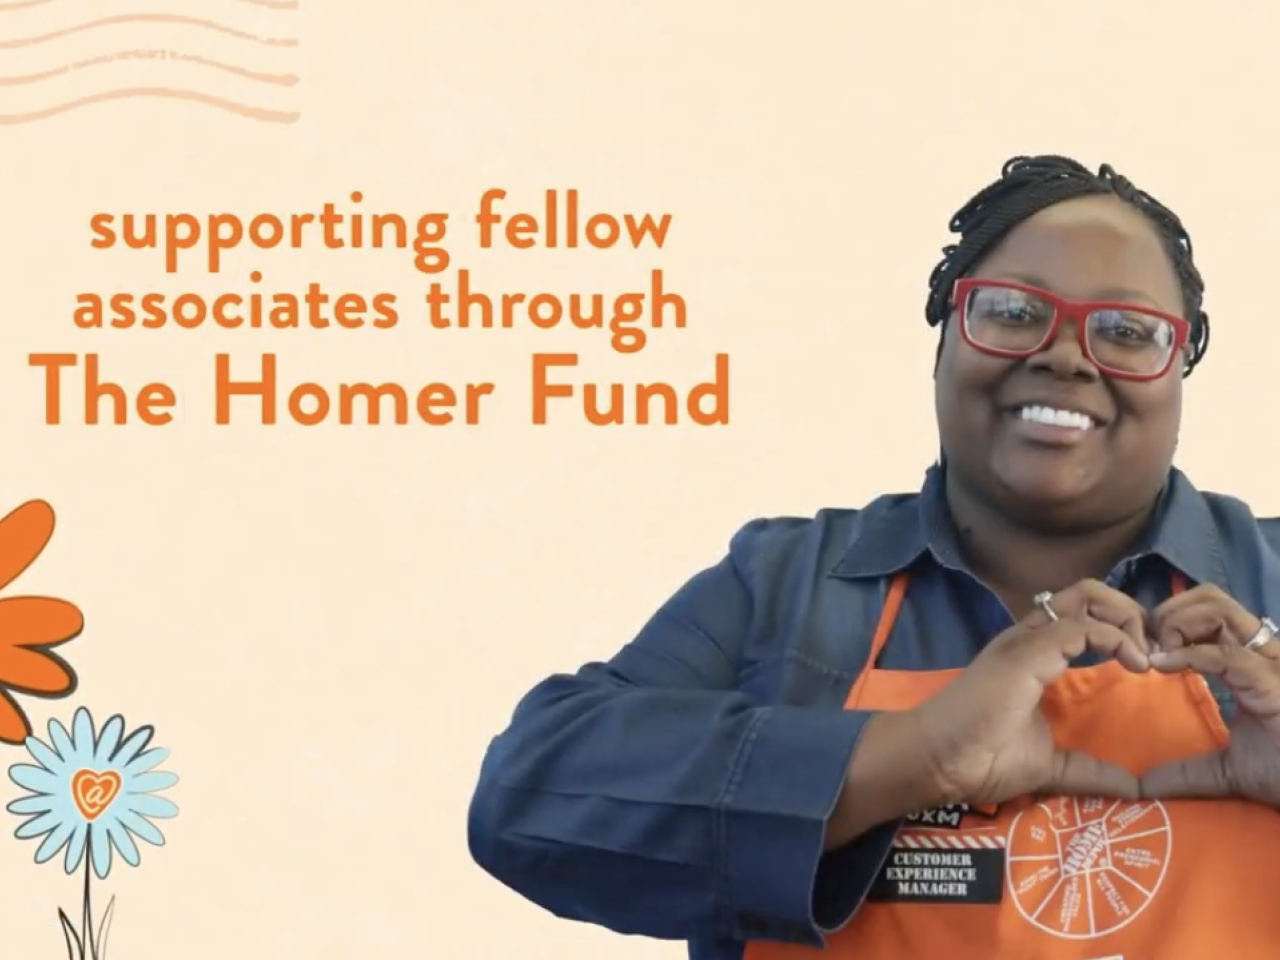 Supporting fellow associates through The Homer Fund.